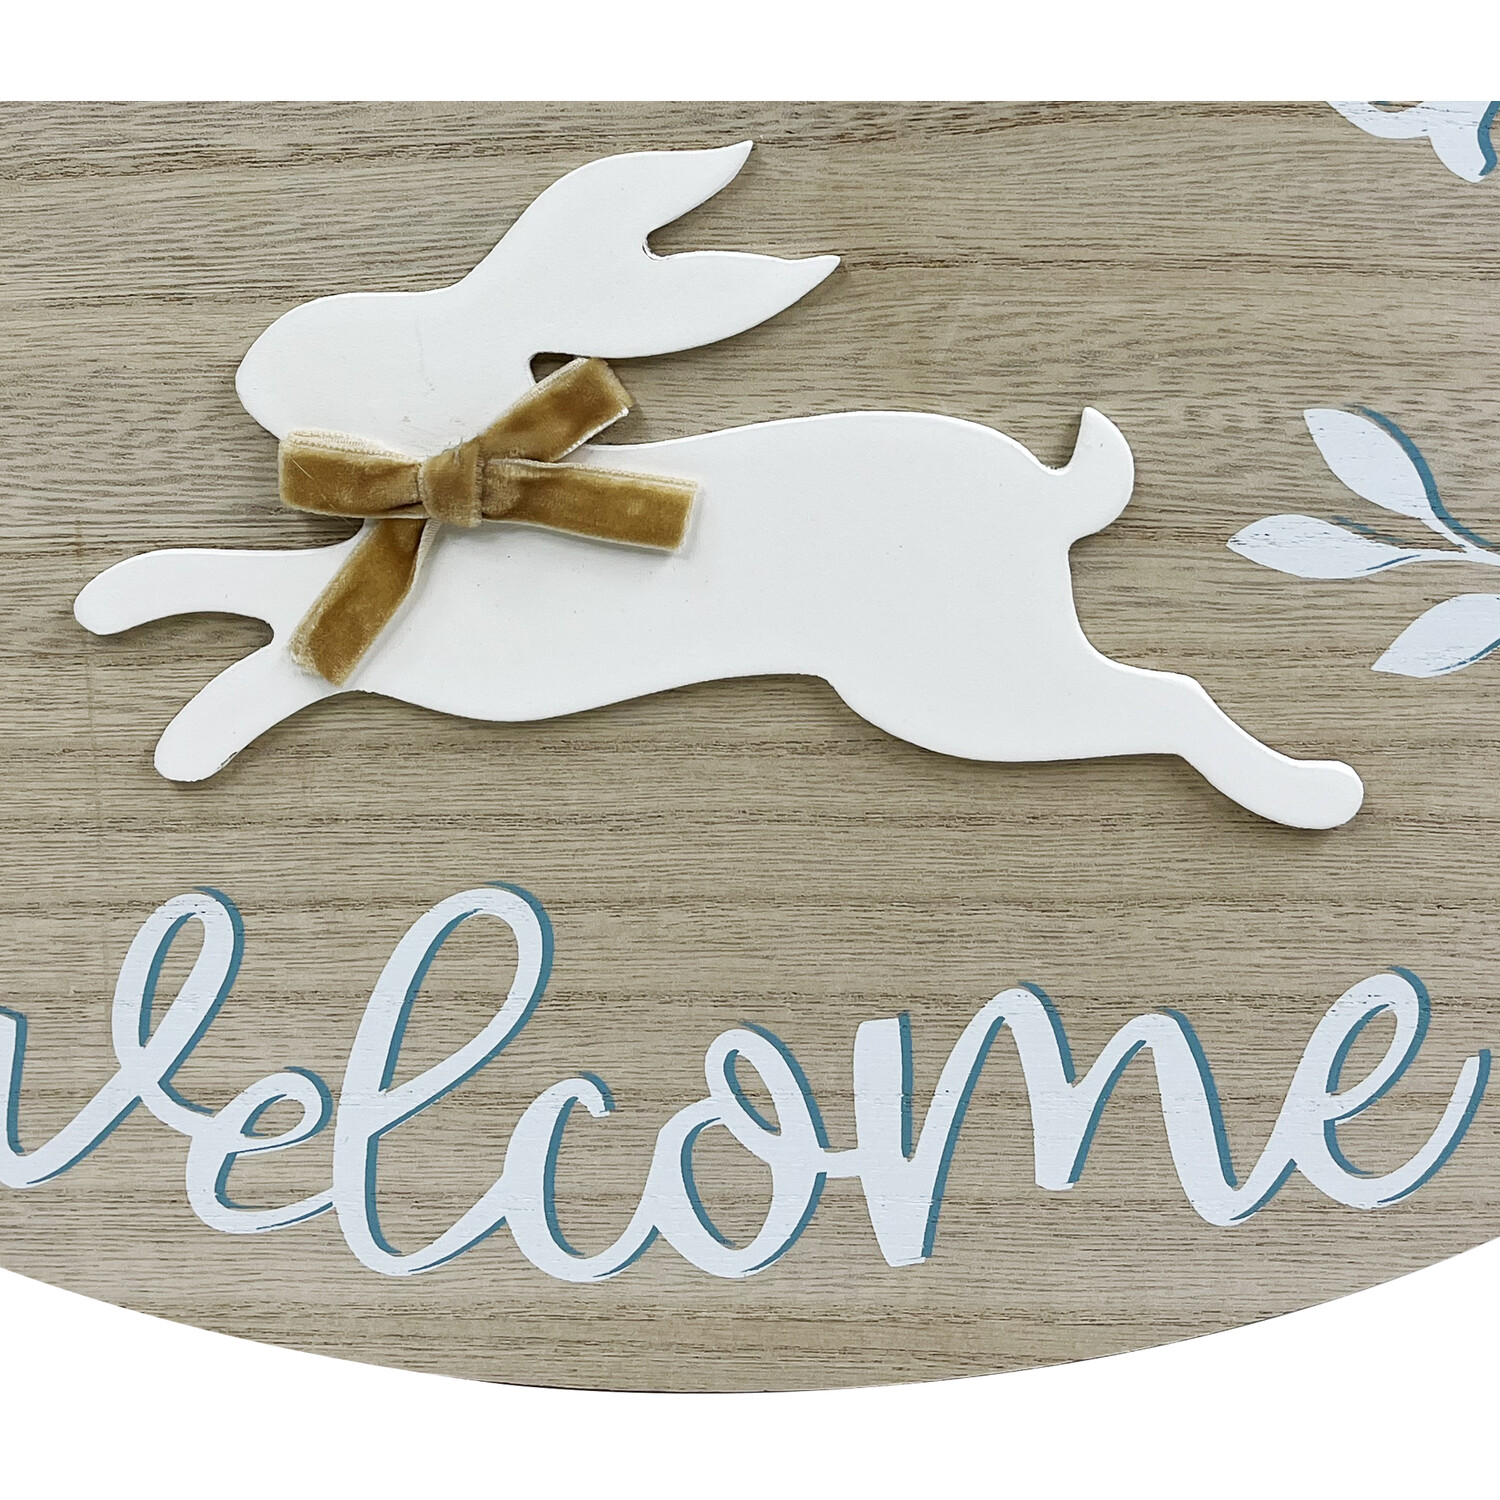 Welcome Spring Bunny Plaque - Brown Image 4